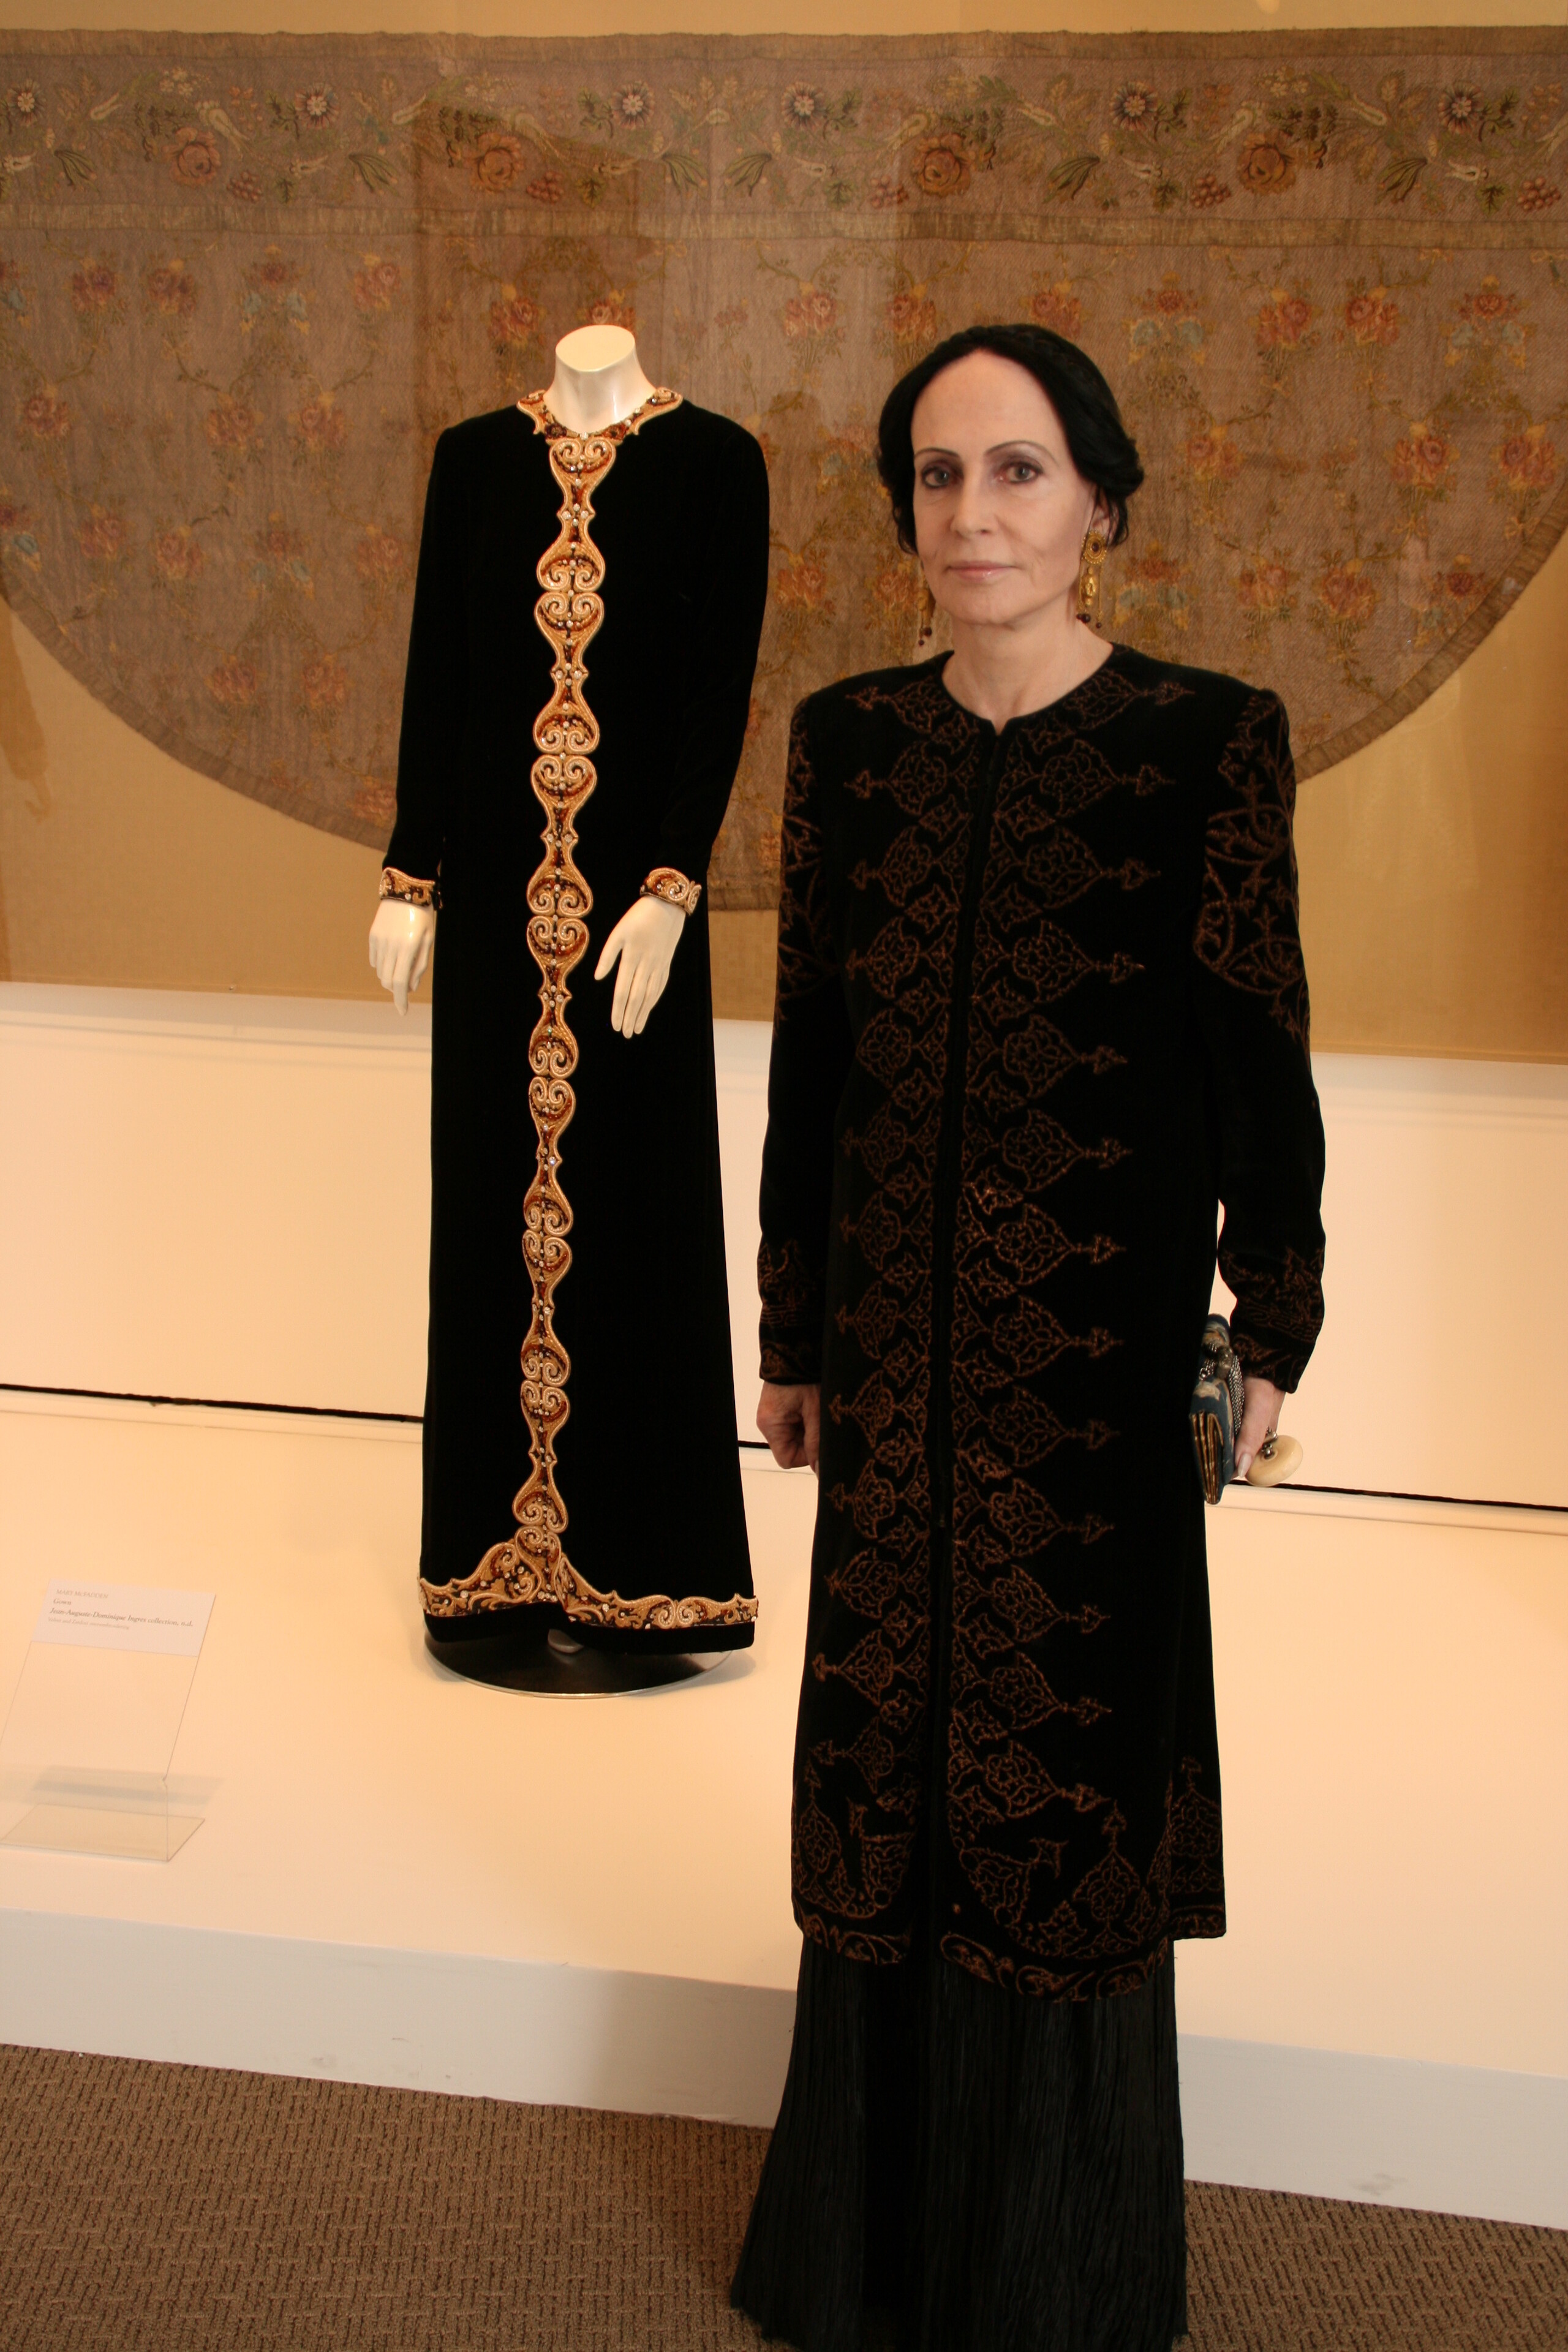 A woman with a light skin tone and black hair in a bun stands before a mannequin wearing a black gown with gold lace.